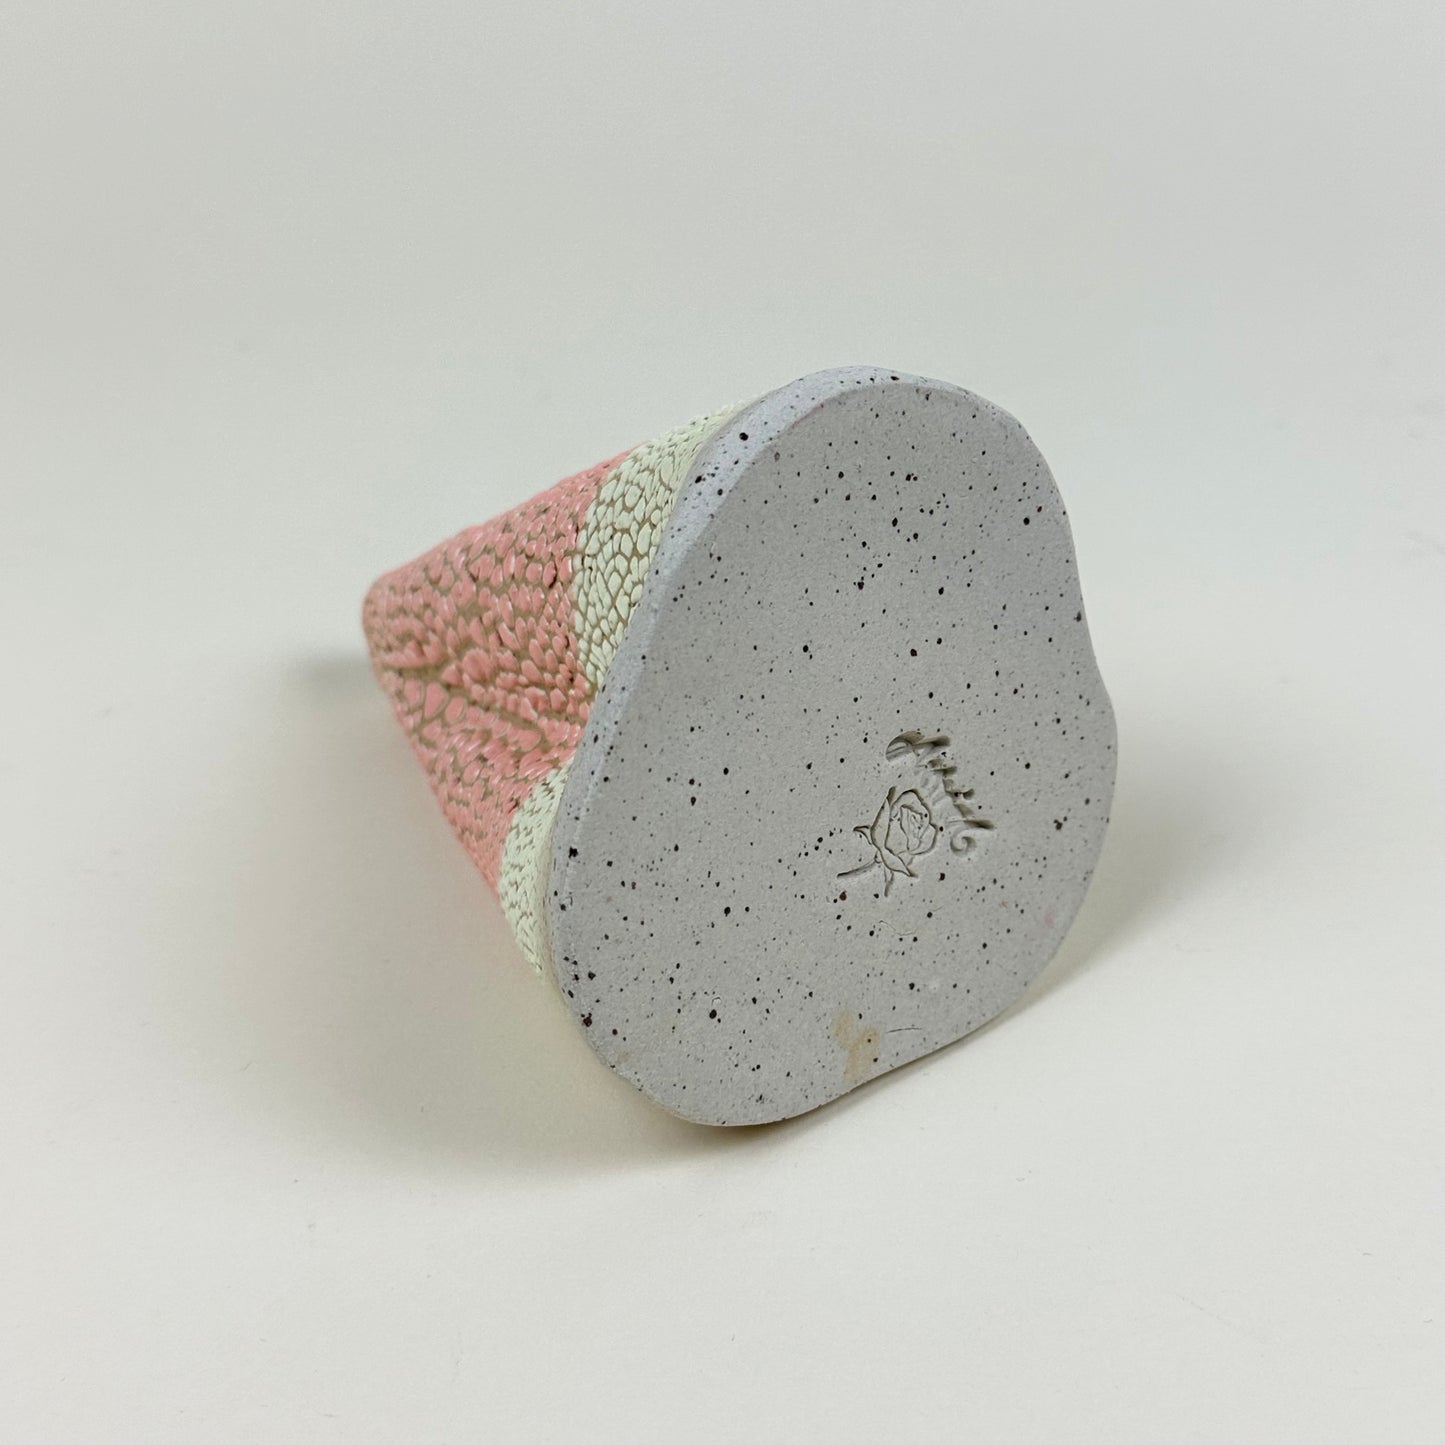 Pink and light yellow volcano vase (L) by Astrid Öhman.